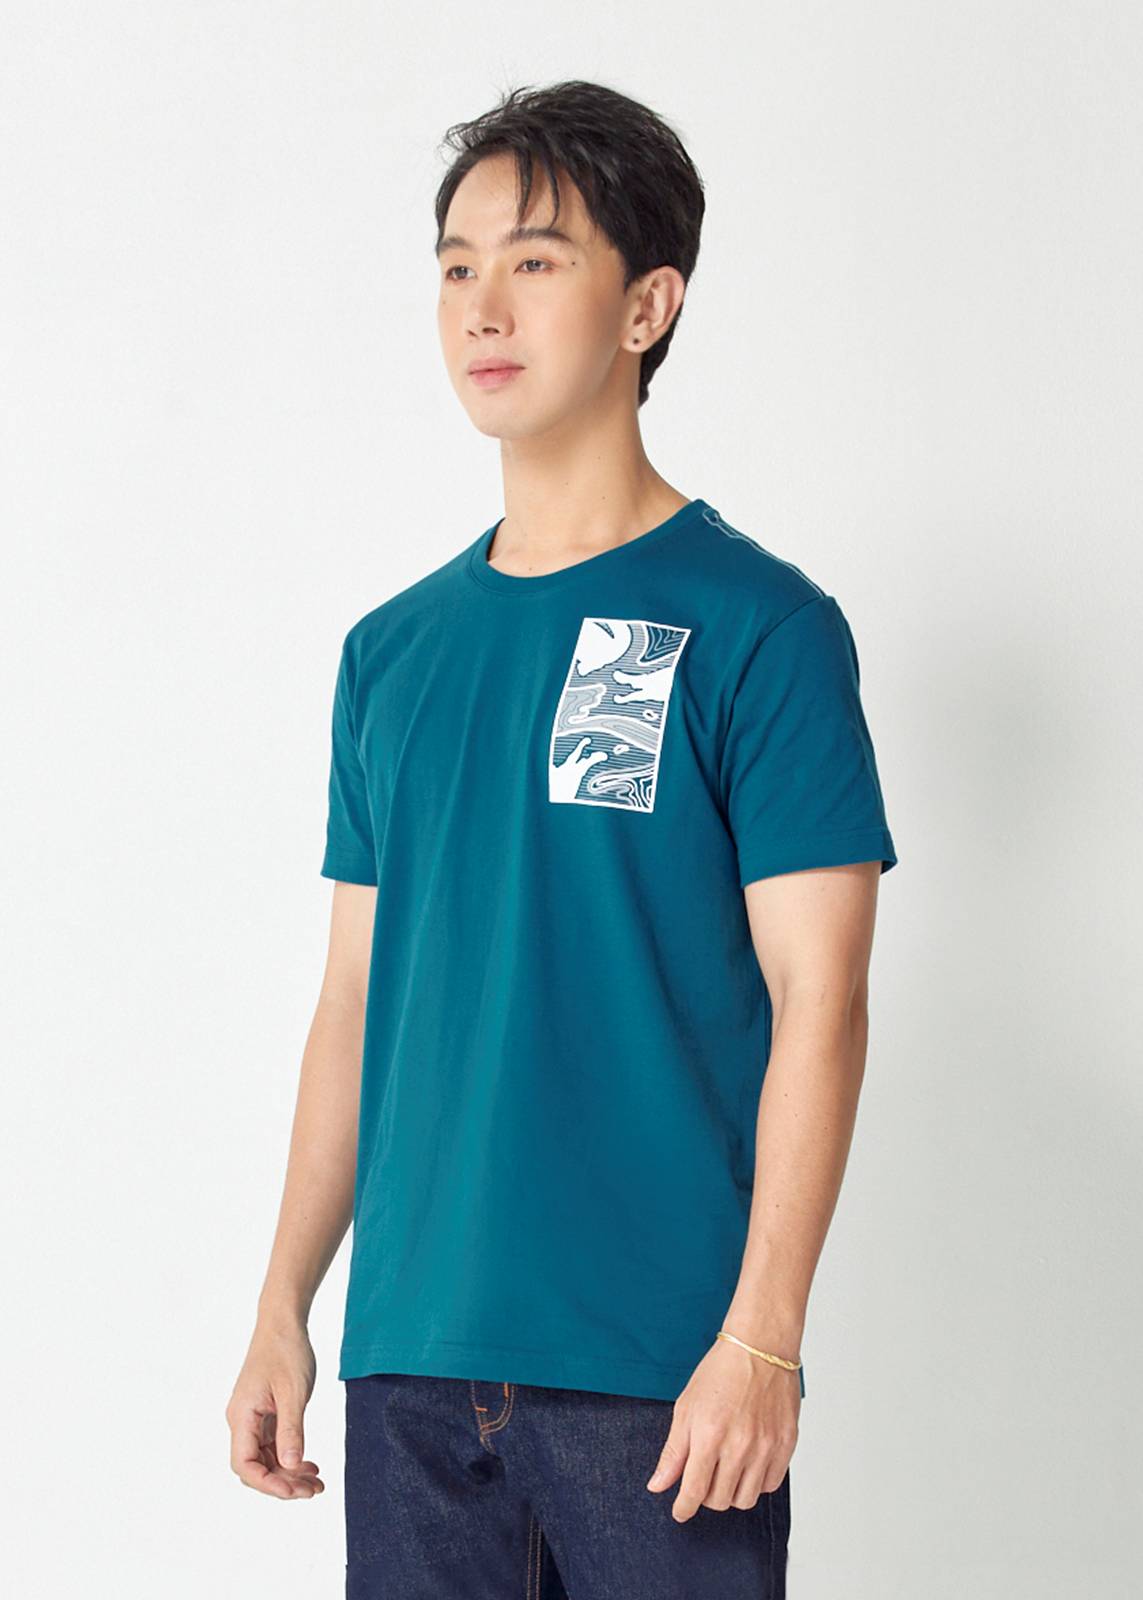 MARINE TEAL GREEN CUSTOM FIT CREW NECK T-SHIRT WITH GRAPHIC PRINT